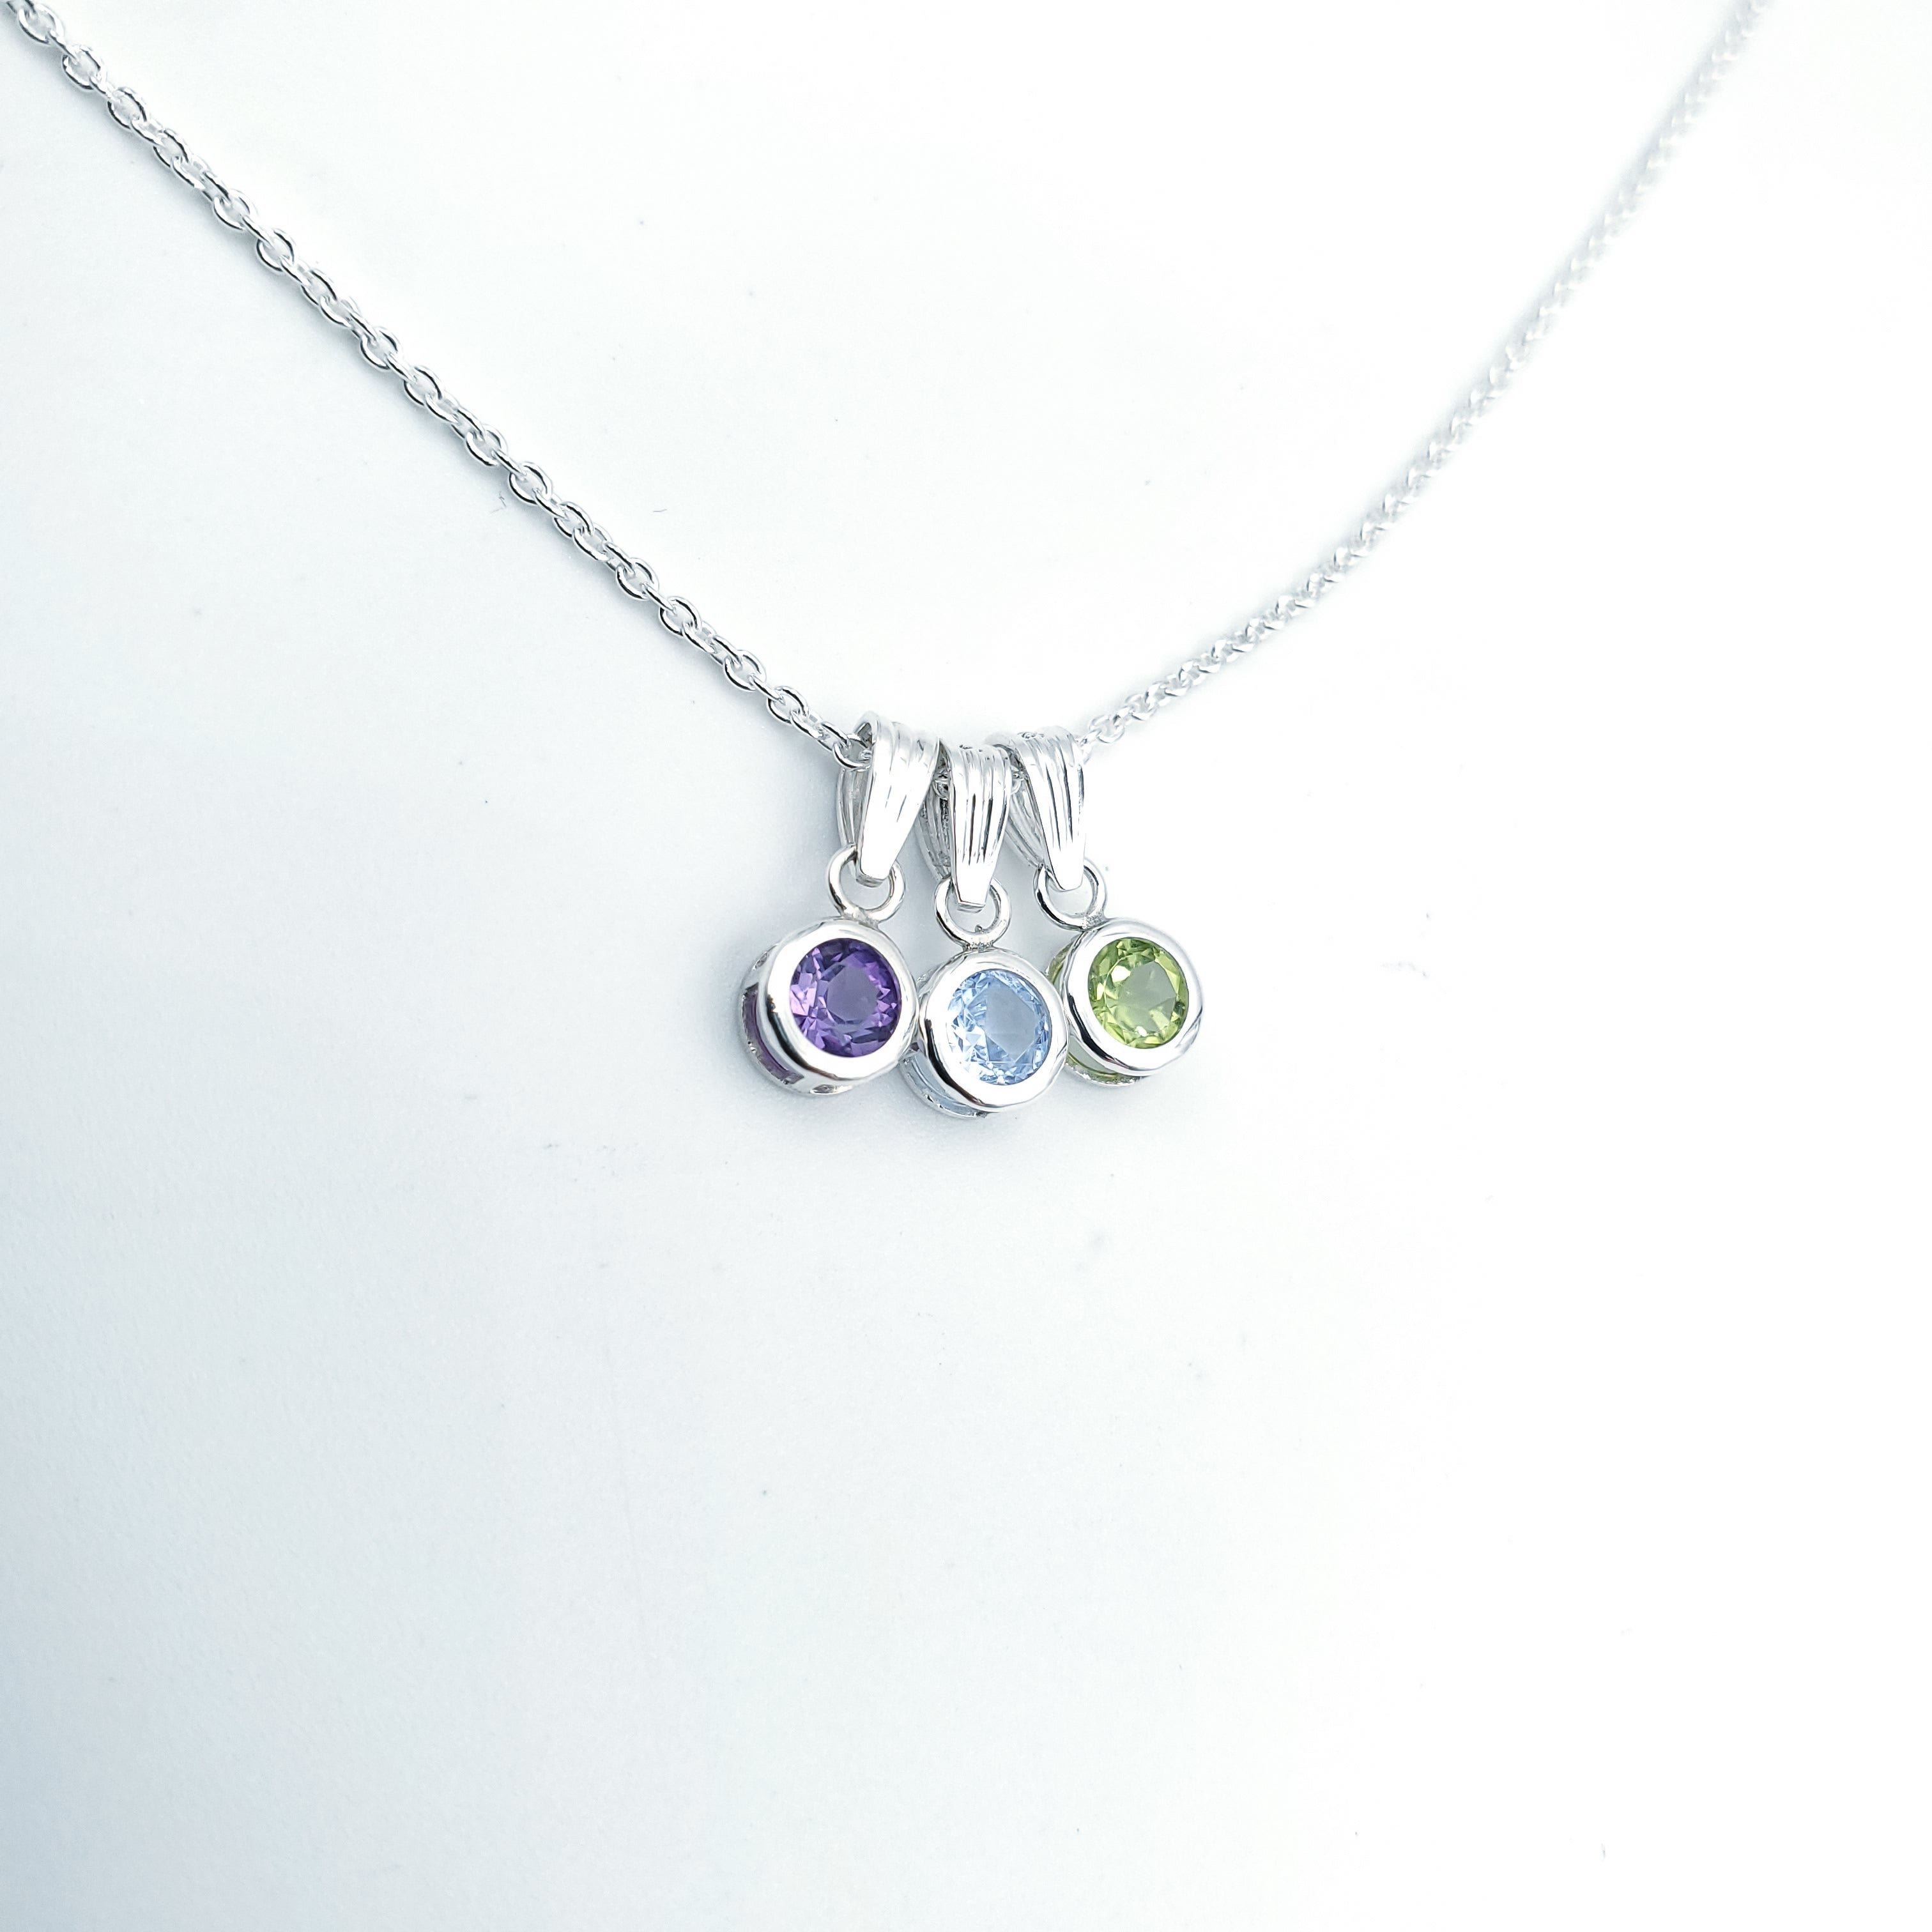 Necklace with three birthstone pendants: February, March, August 